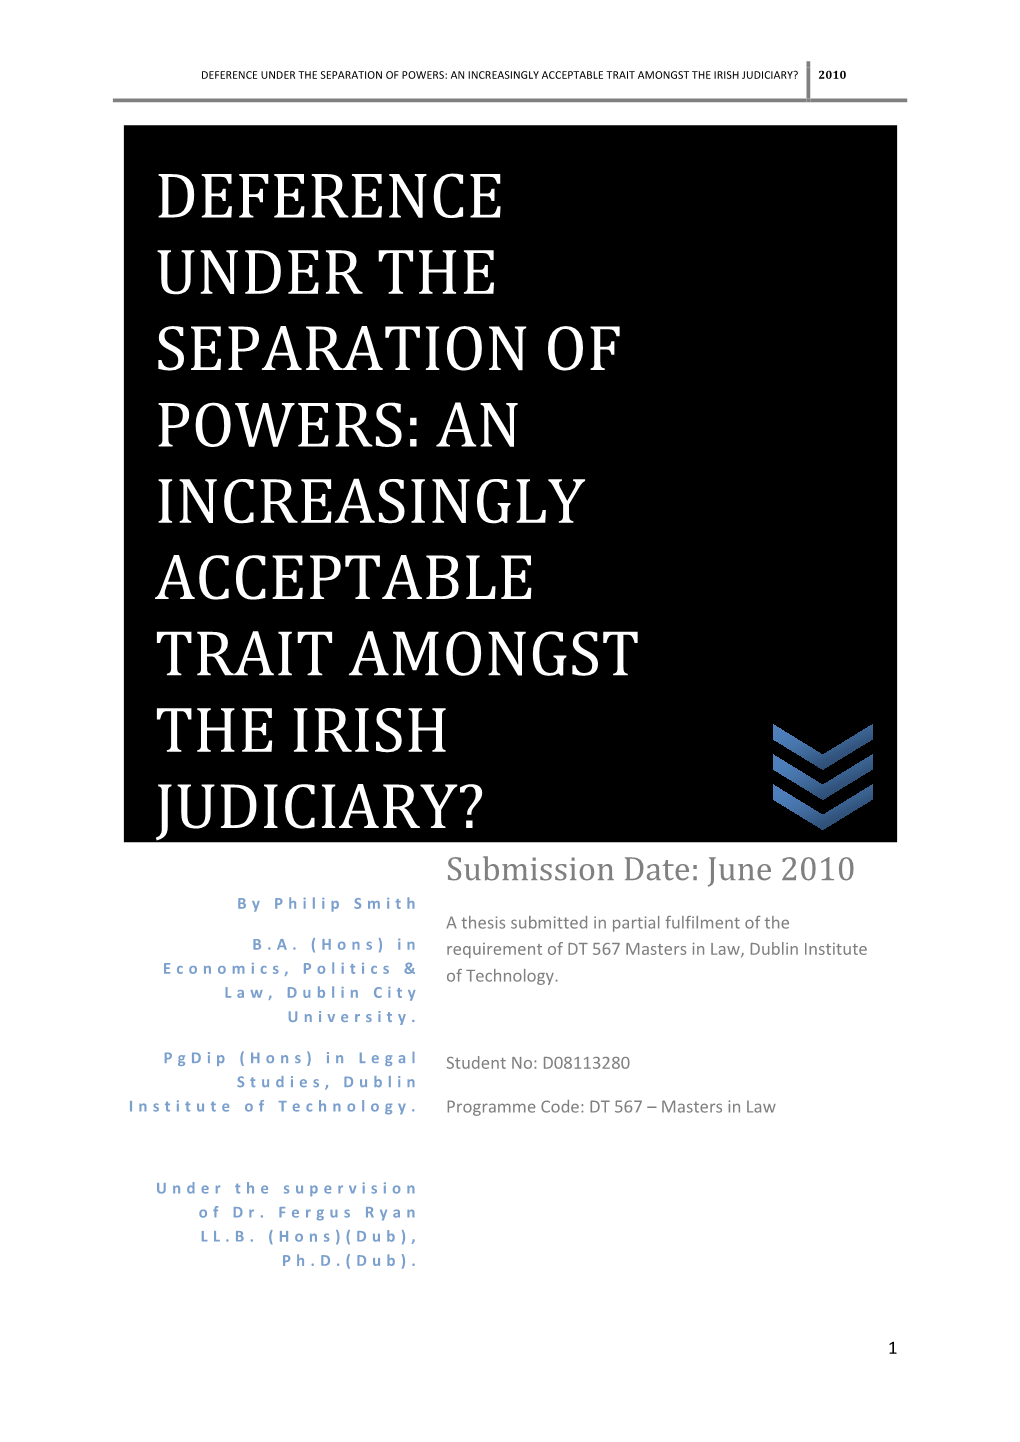 Deference Under the Separation of Powers: an Increasingly Acceptable Trait Amongst the Irish Judiciary? 2010